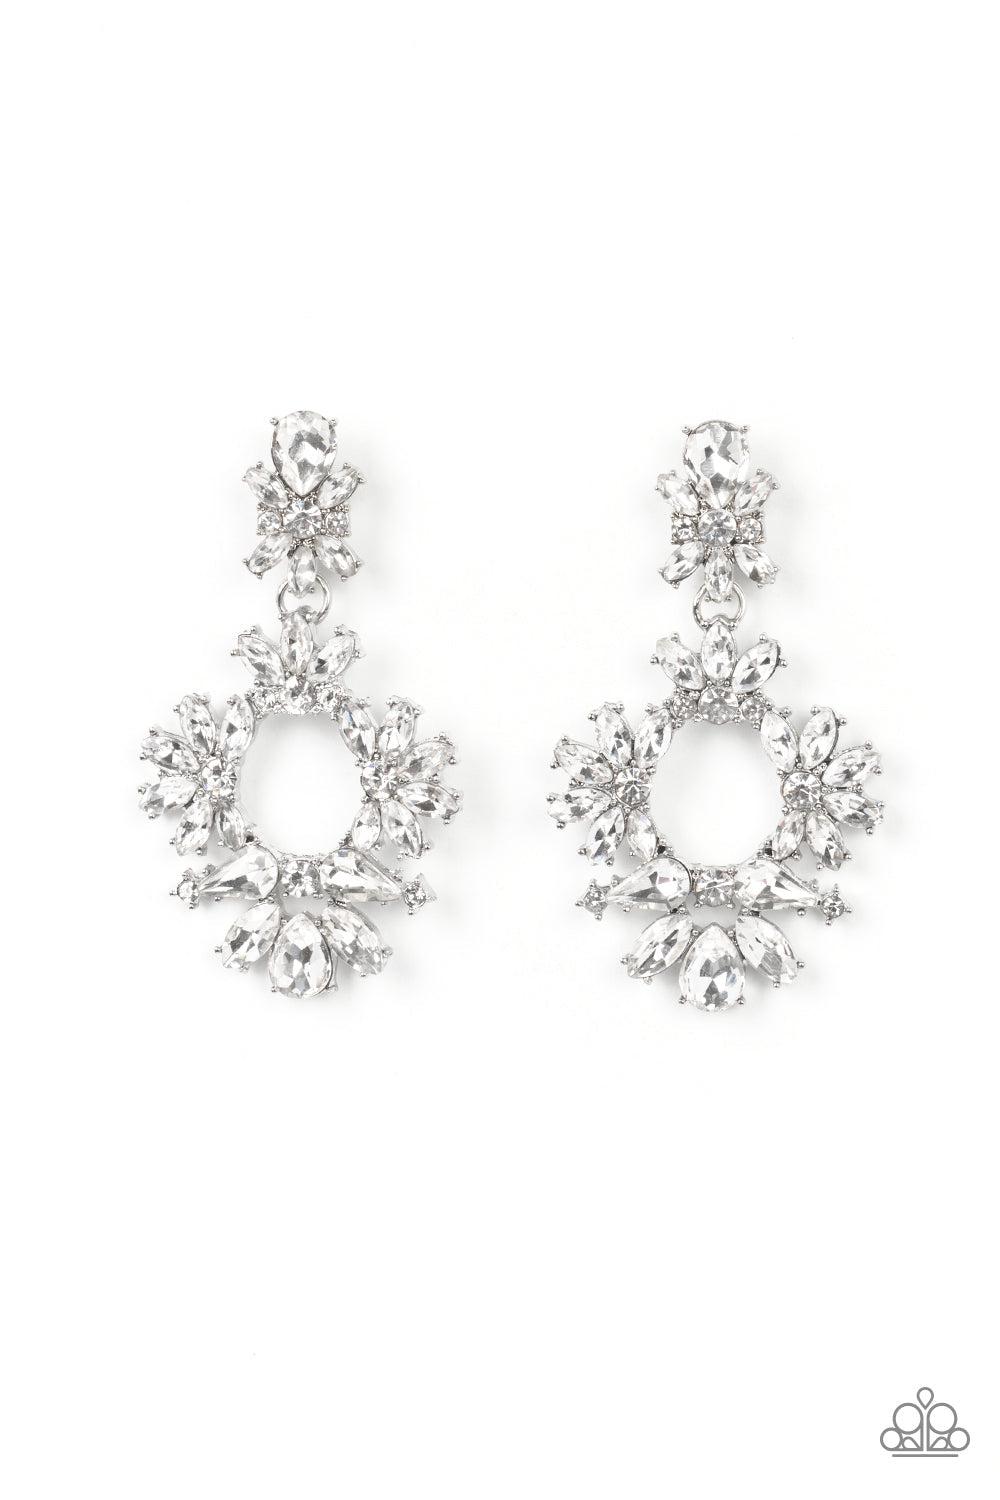 Leave Them Speechless White Rhinestone Earrings - Paparazzi Accessories- lightbox - CarasShop.com - $5 Jewelry by Cara Jewels